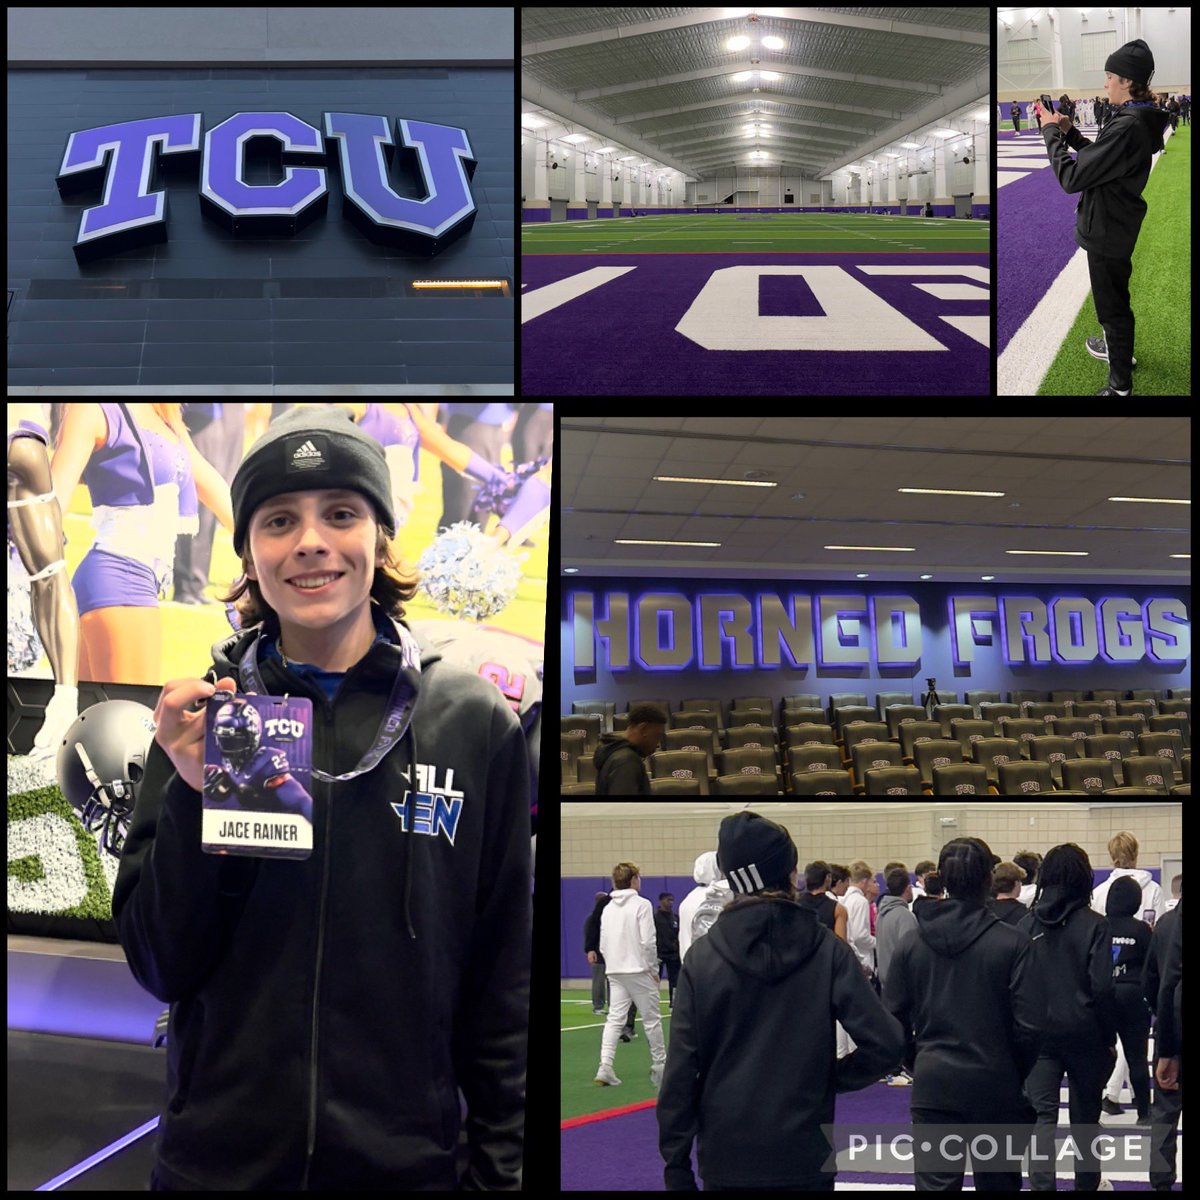 🟪🔳 Thanks to @CoachSonnyDykes and @justinallen_13 for the opportunity to visit @TCUFootball. This school is special, and the facilities are fire!🔥🔥🔥 @QBHitList @quarterbackmag @Ath_Dynasty @CoachMartin_18 @mcneill_josh #Classof2027 #QBHLTop200 #wtd #WeALLEN #knowyourpurpose